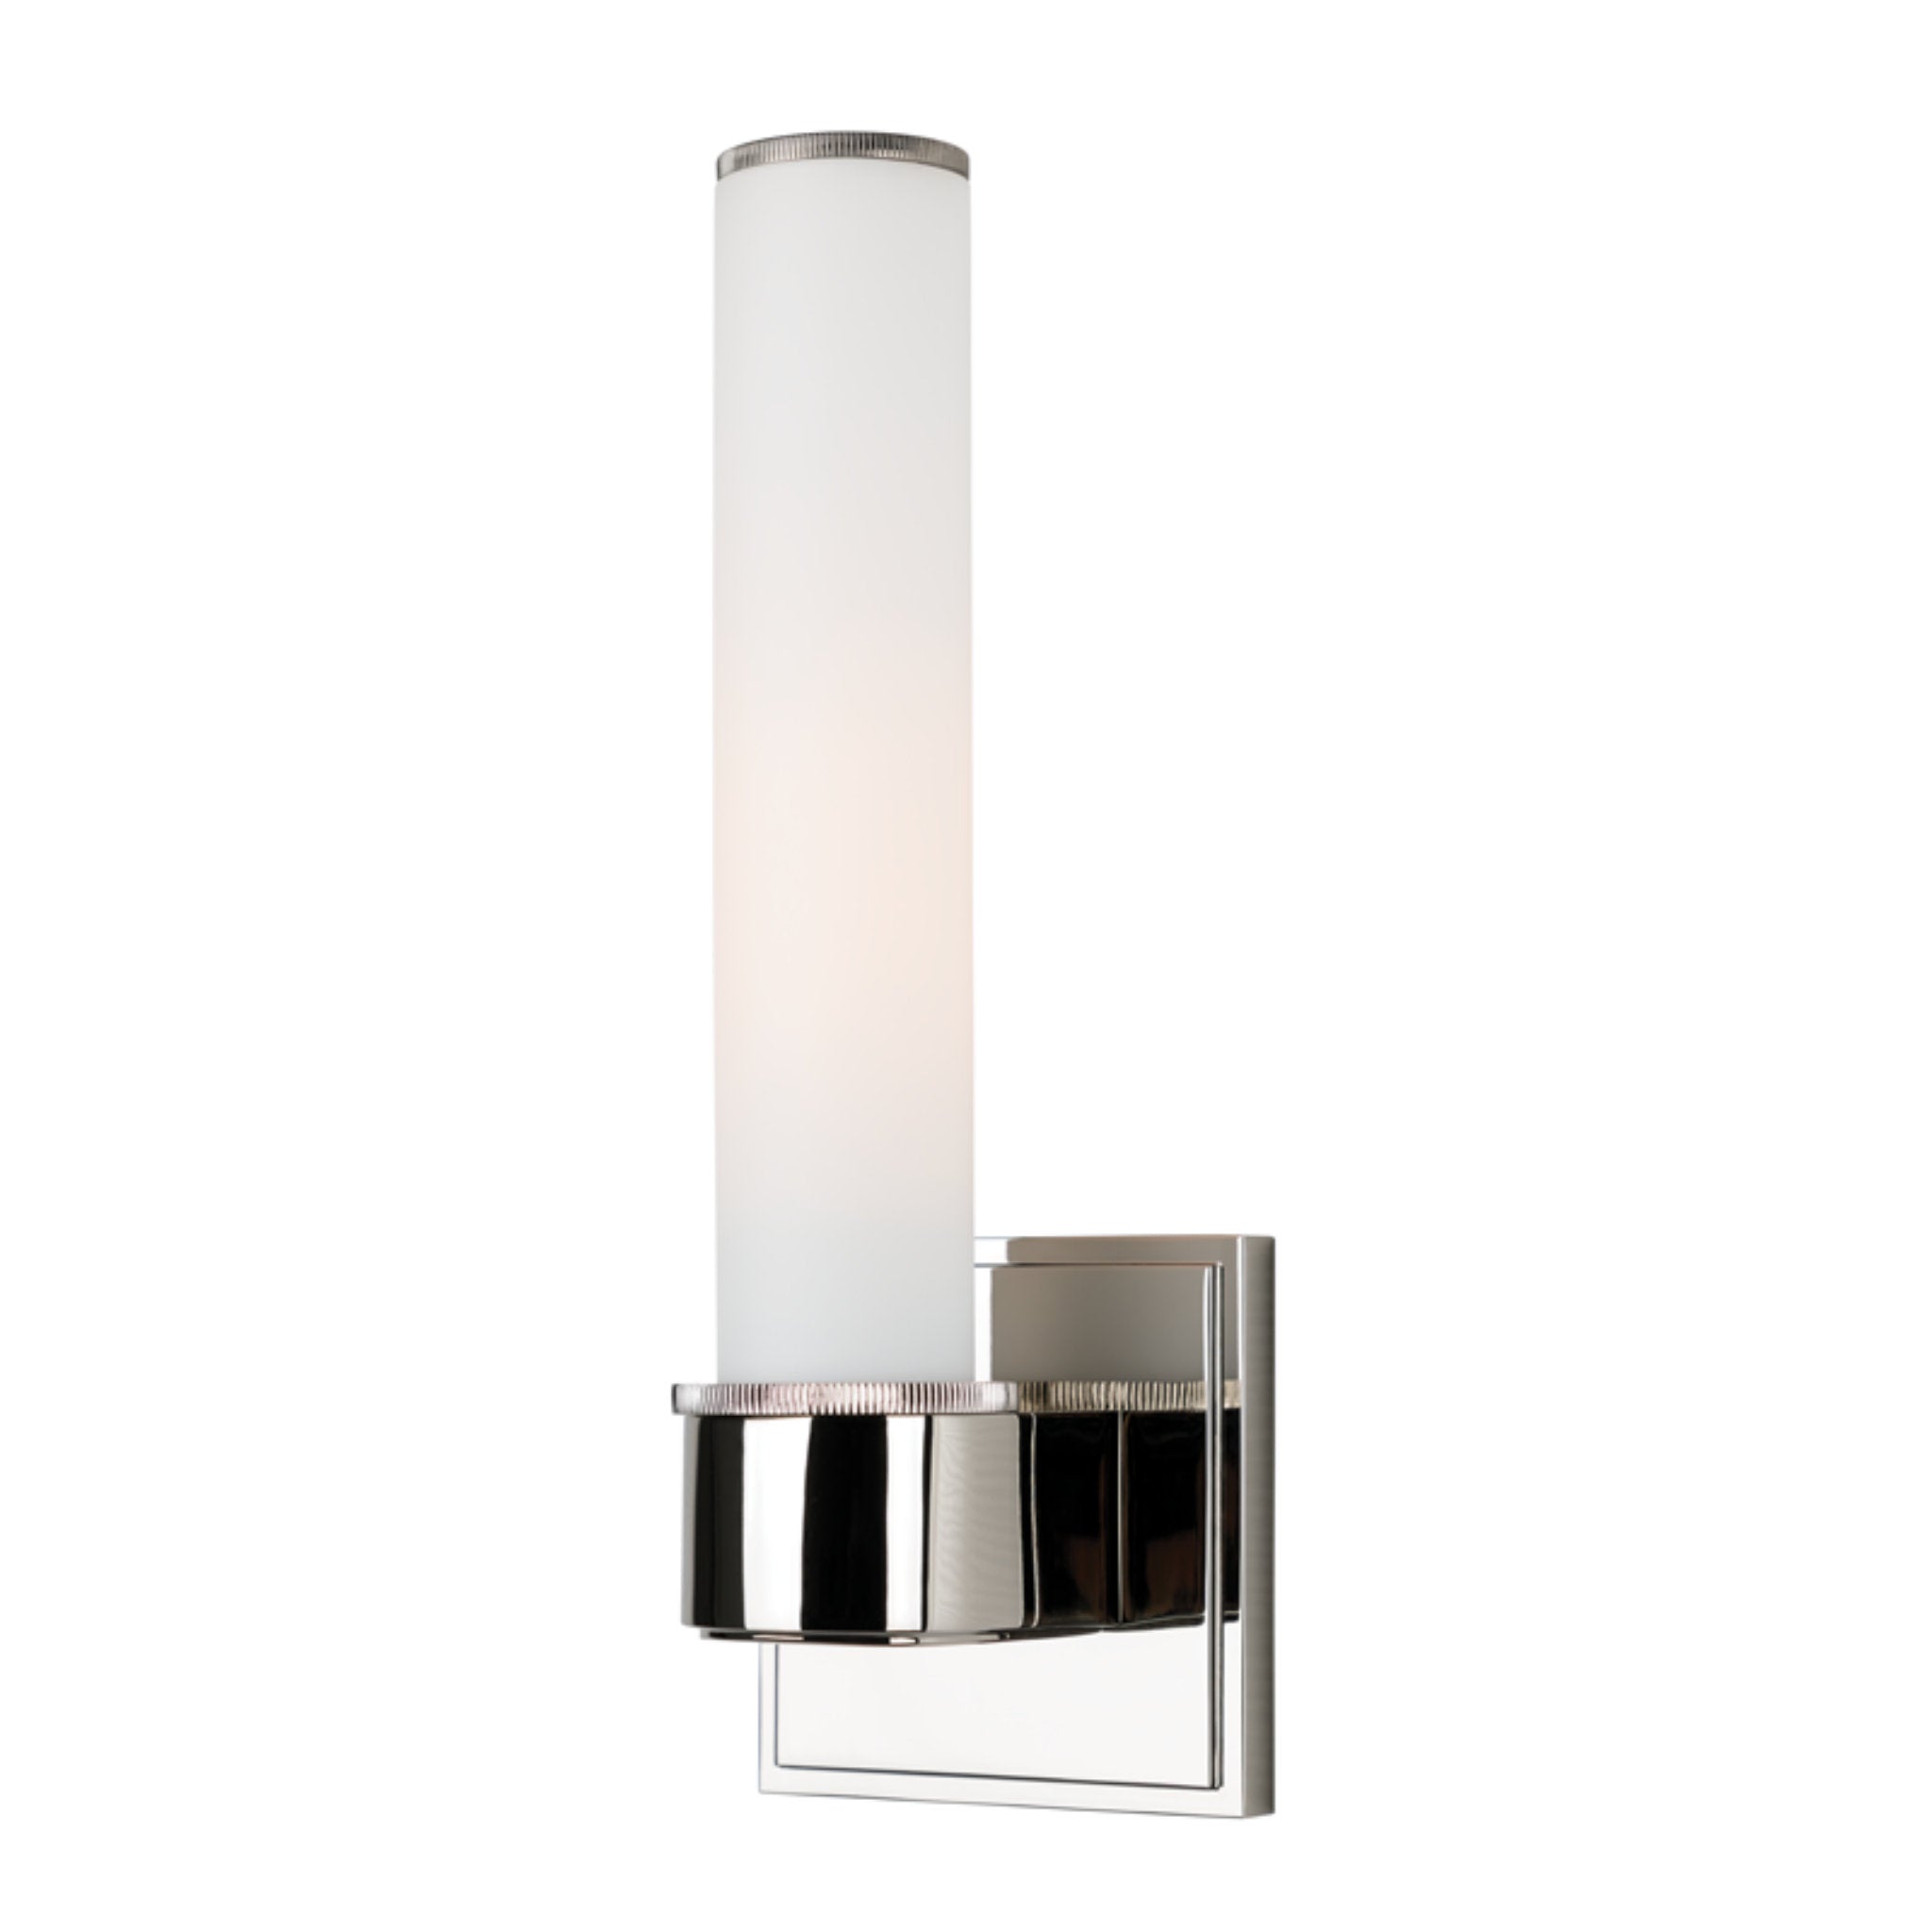 Mill Valley 1 Light Bath and Vanity in Polished Nickel